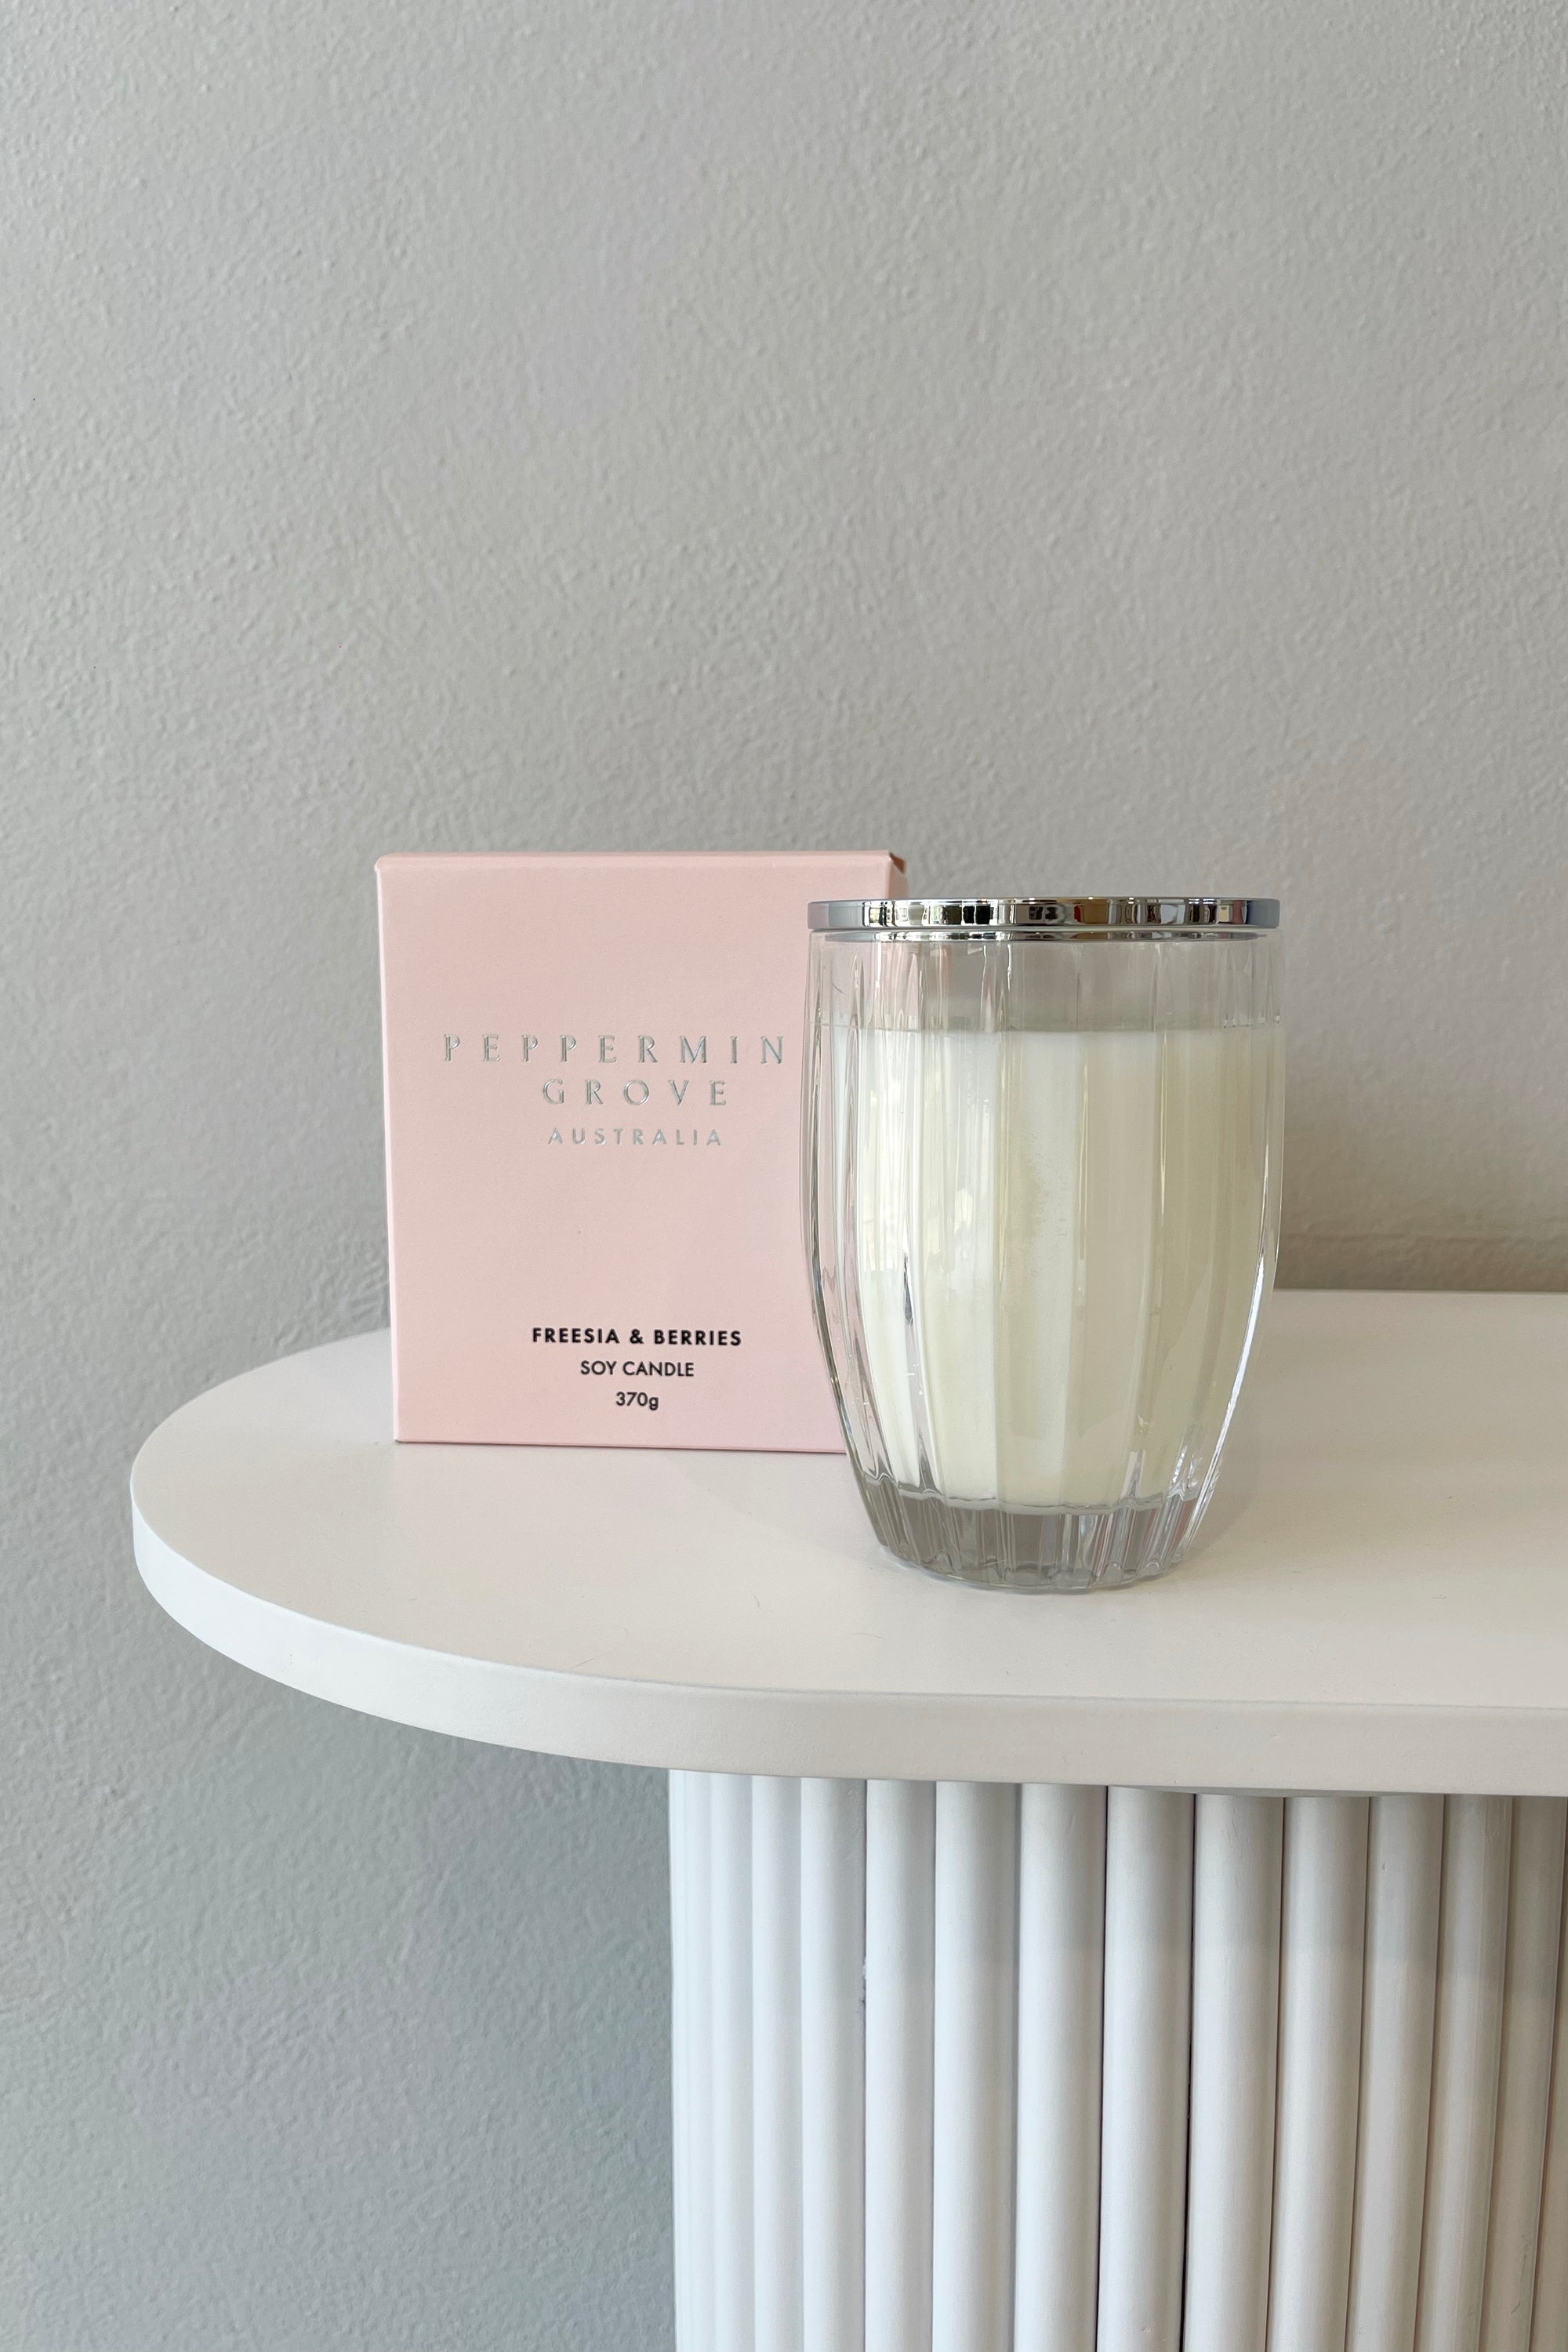 Peppermint Grove Soy Candle | Freesia & Berries